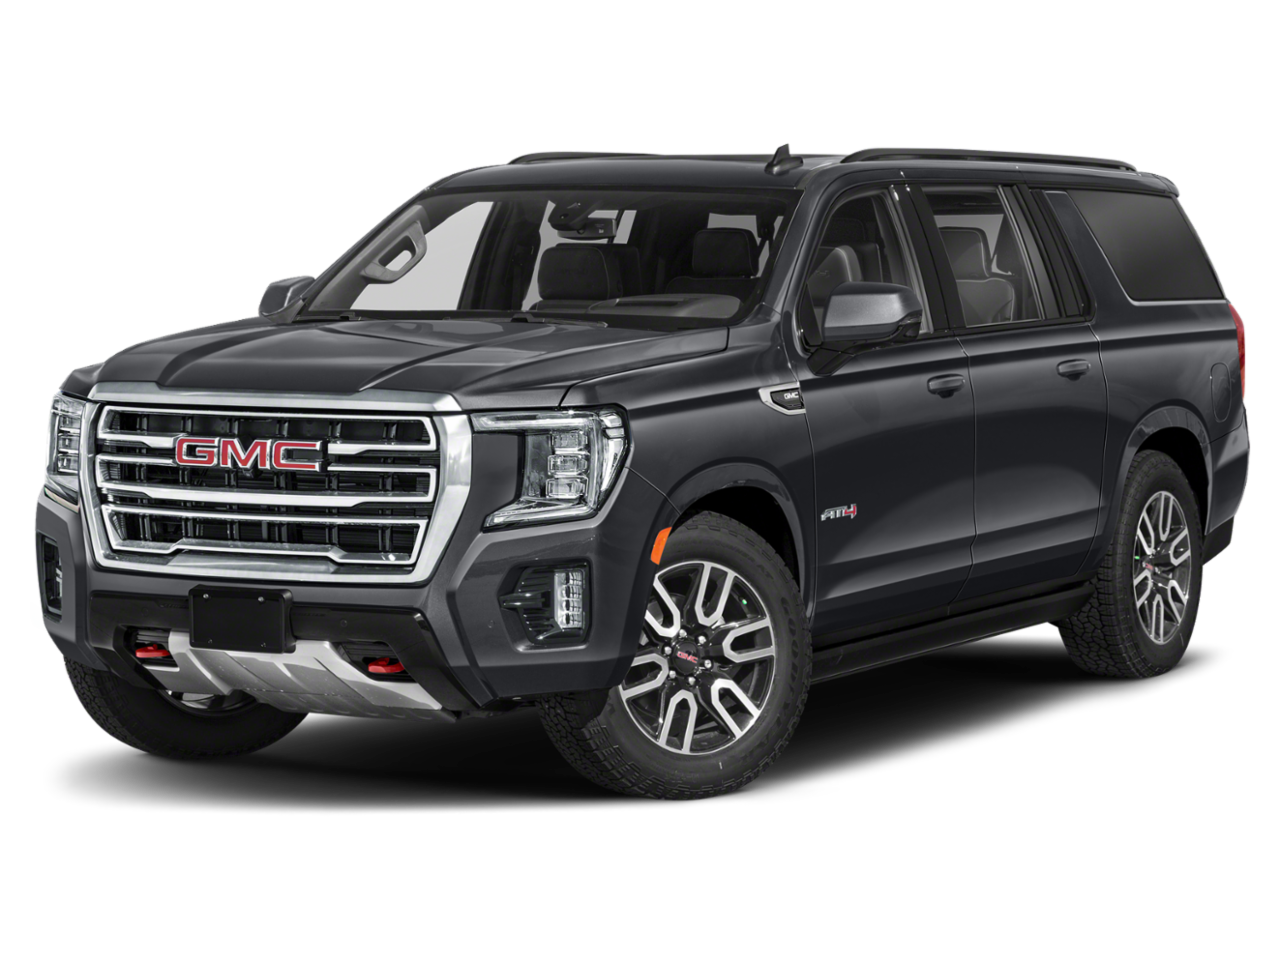 deals-and-incentives-at-vyletel-buick-gmc-in-sterling-heights